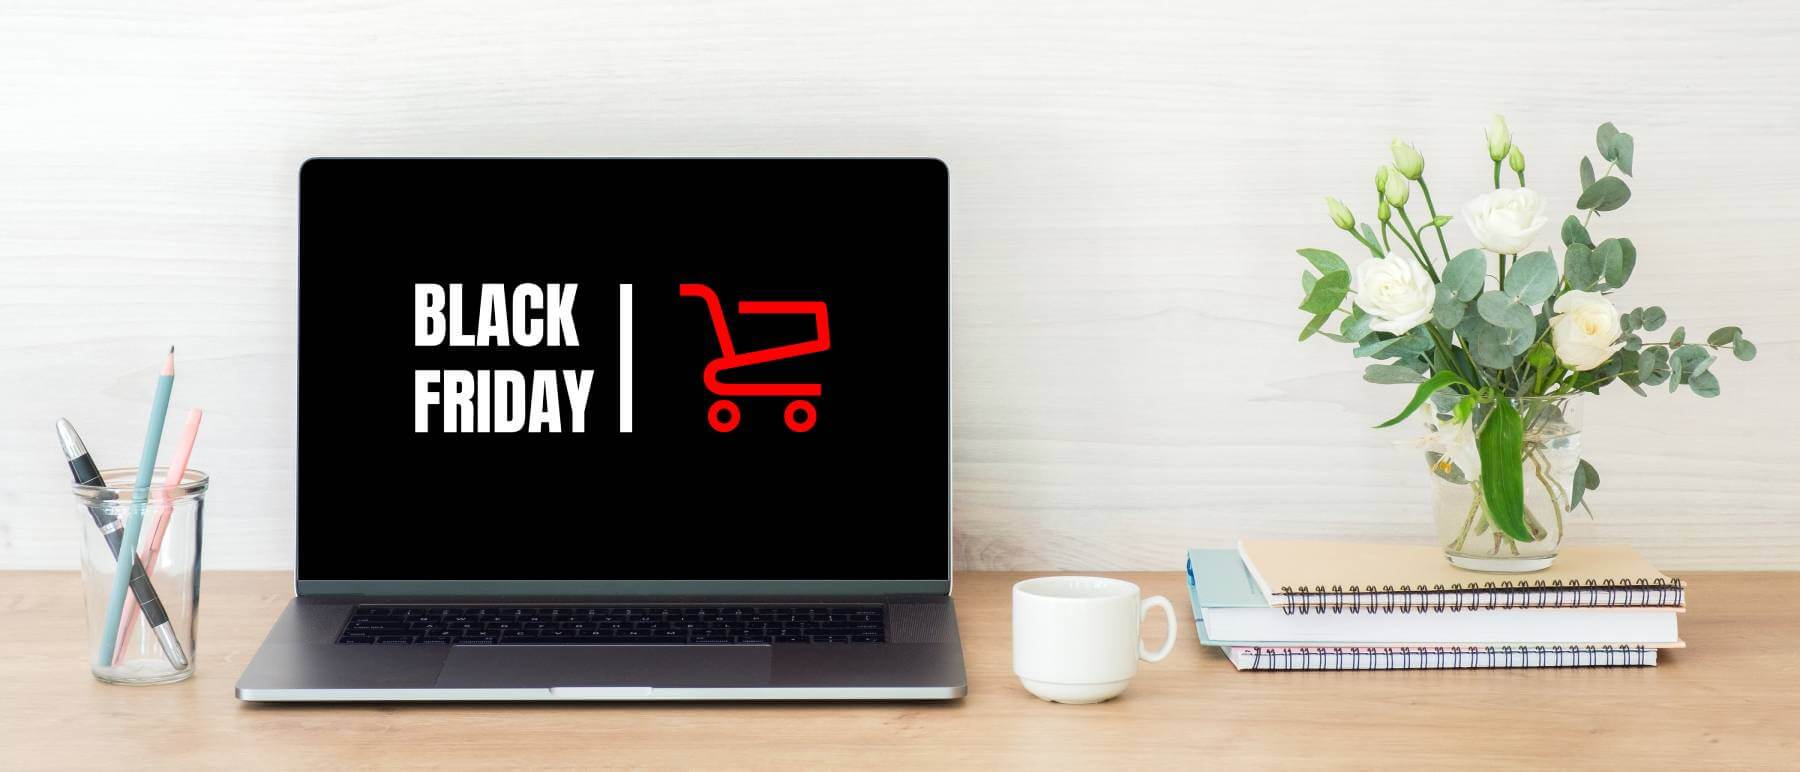 Laptop with “Black Friday” logo on wood desk with flowers, coffee cup and stationery.